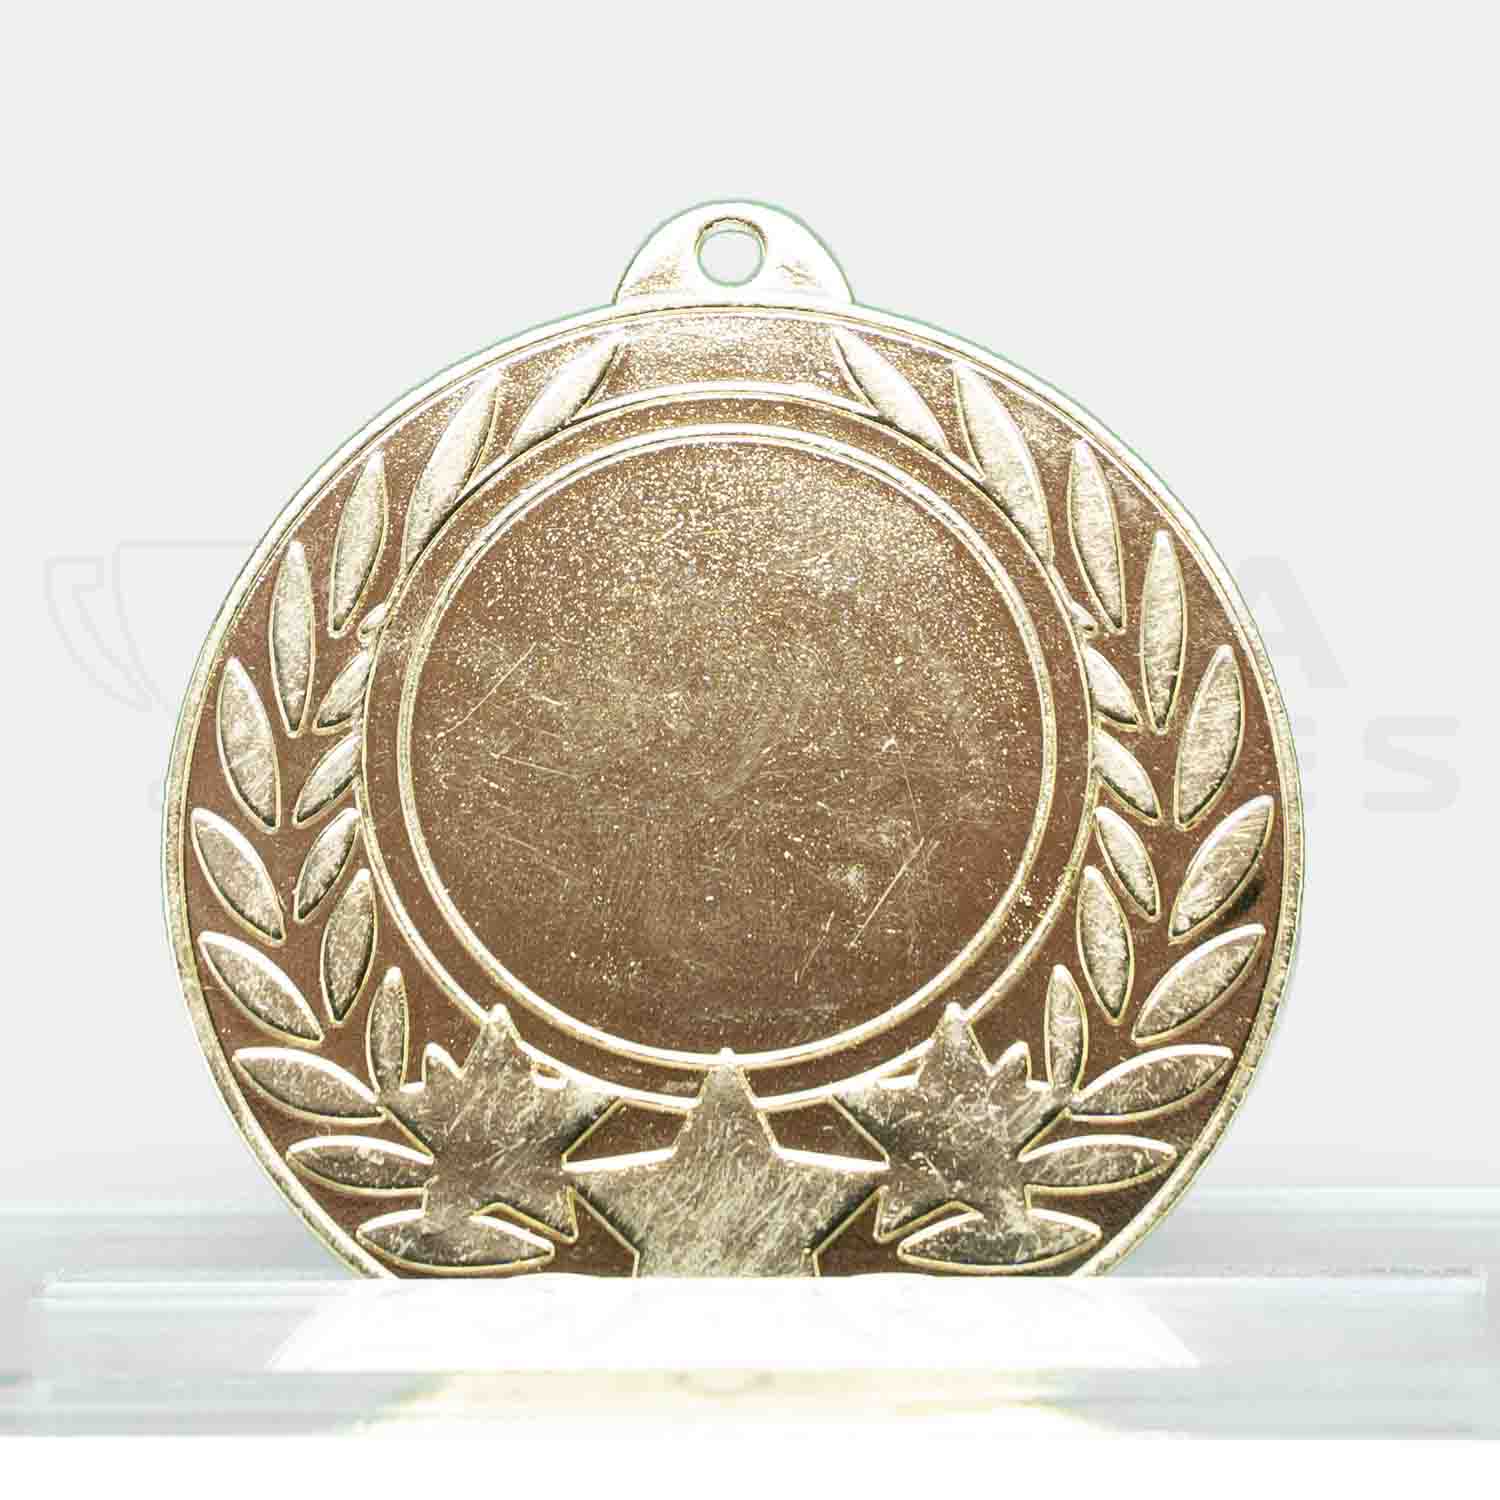 generic-25mm-centre-wreath-medal-gold-1040gvp-front